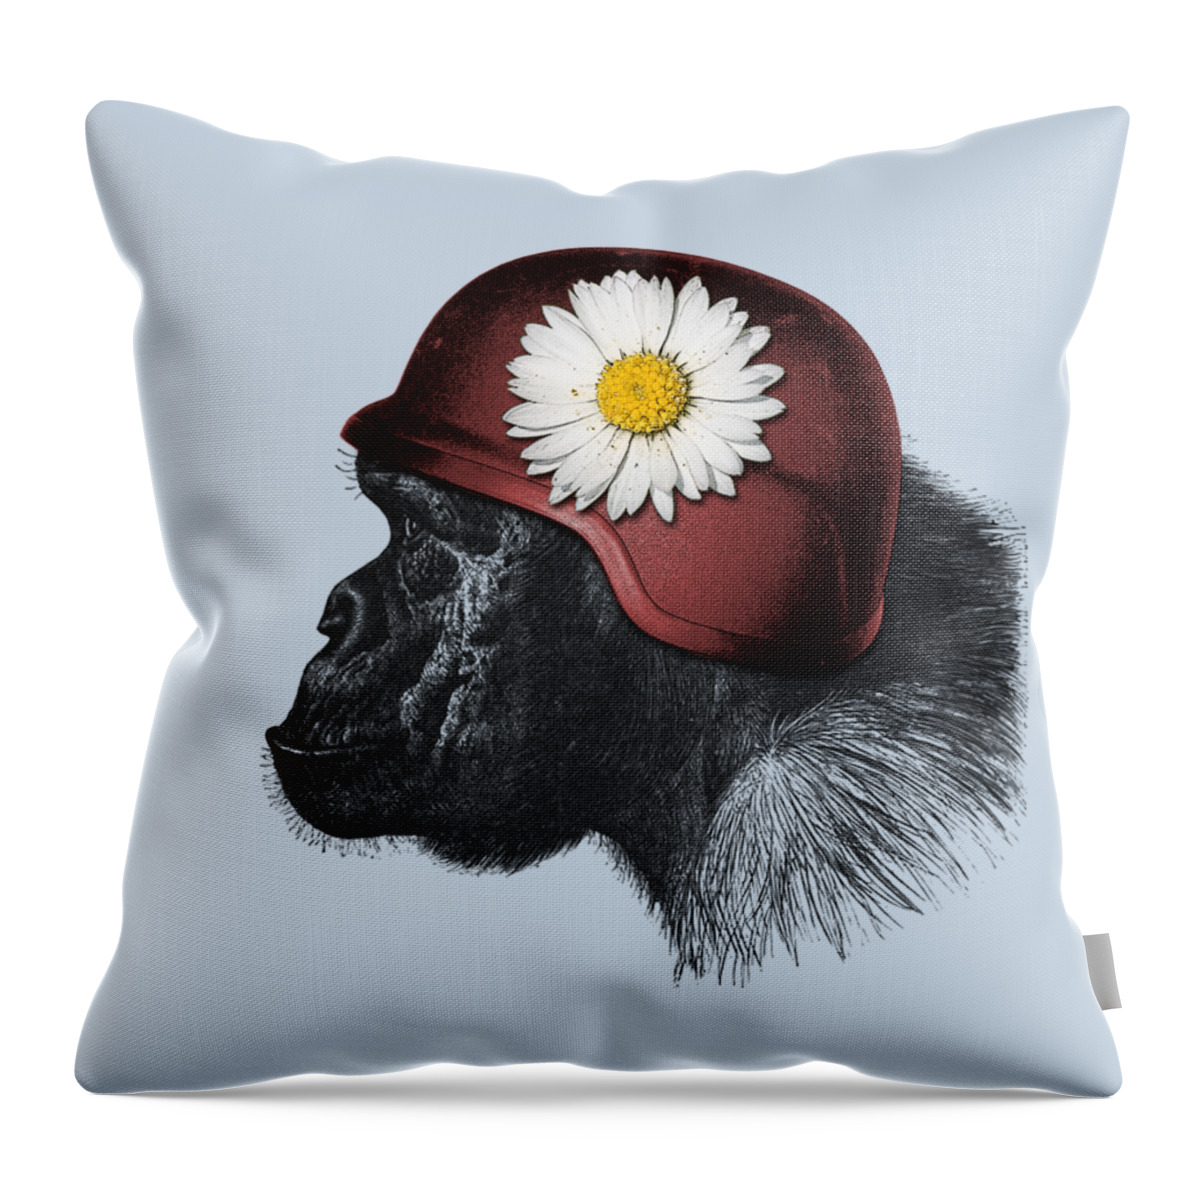 Chimp Throw Pillow featuring the digital art Funny Monkey Face by Madame Memento